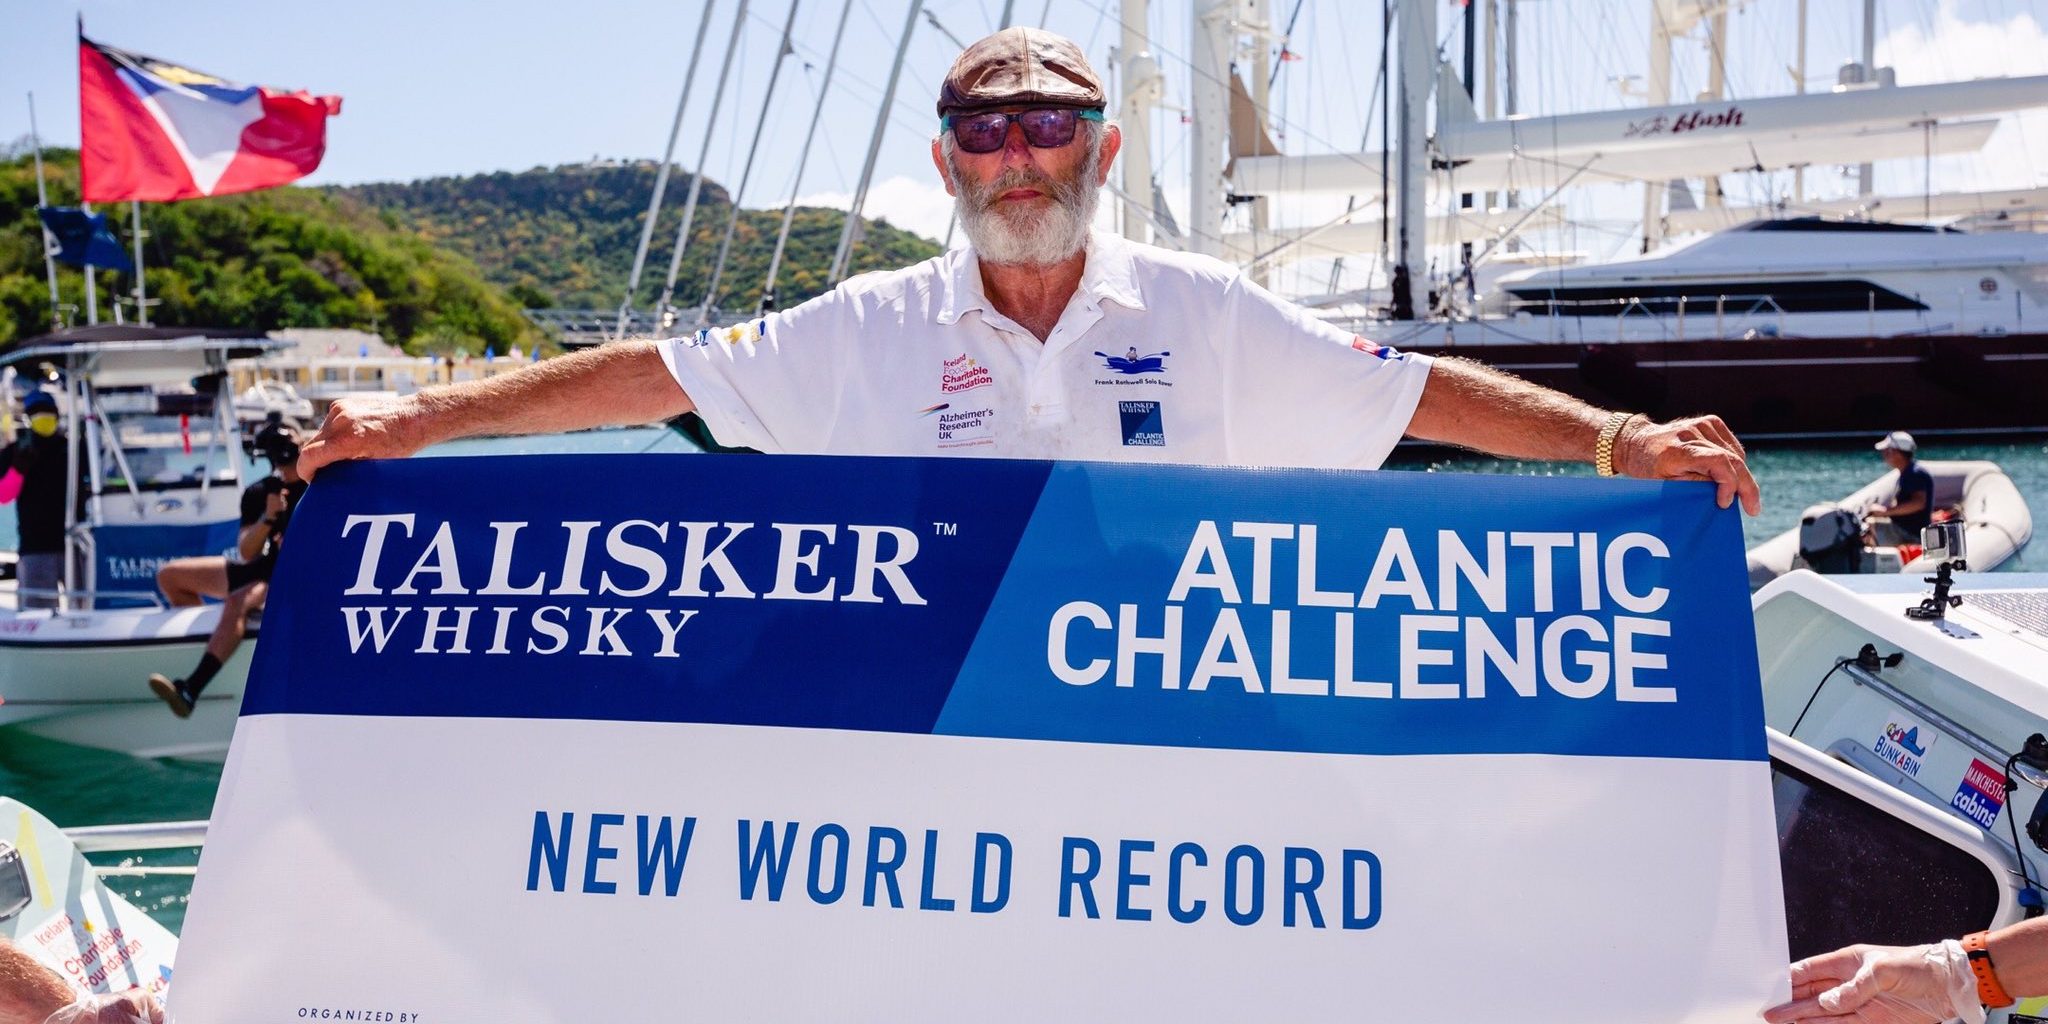 image depicting 70-year-old man is the oldest to row alone across the Atlantic Ocean